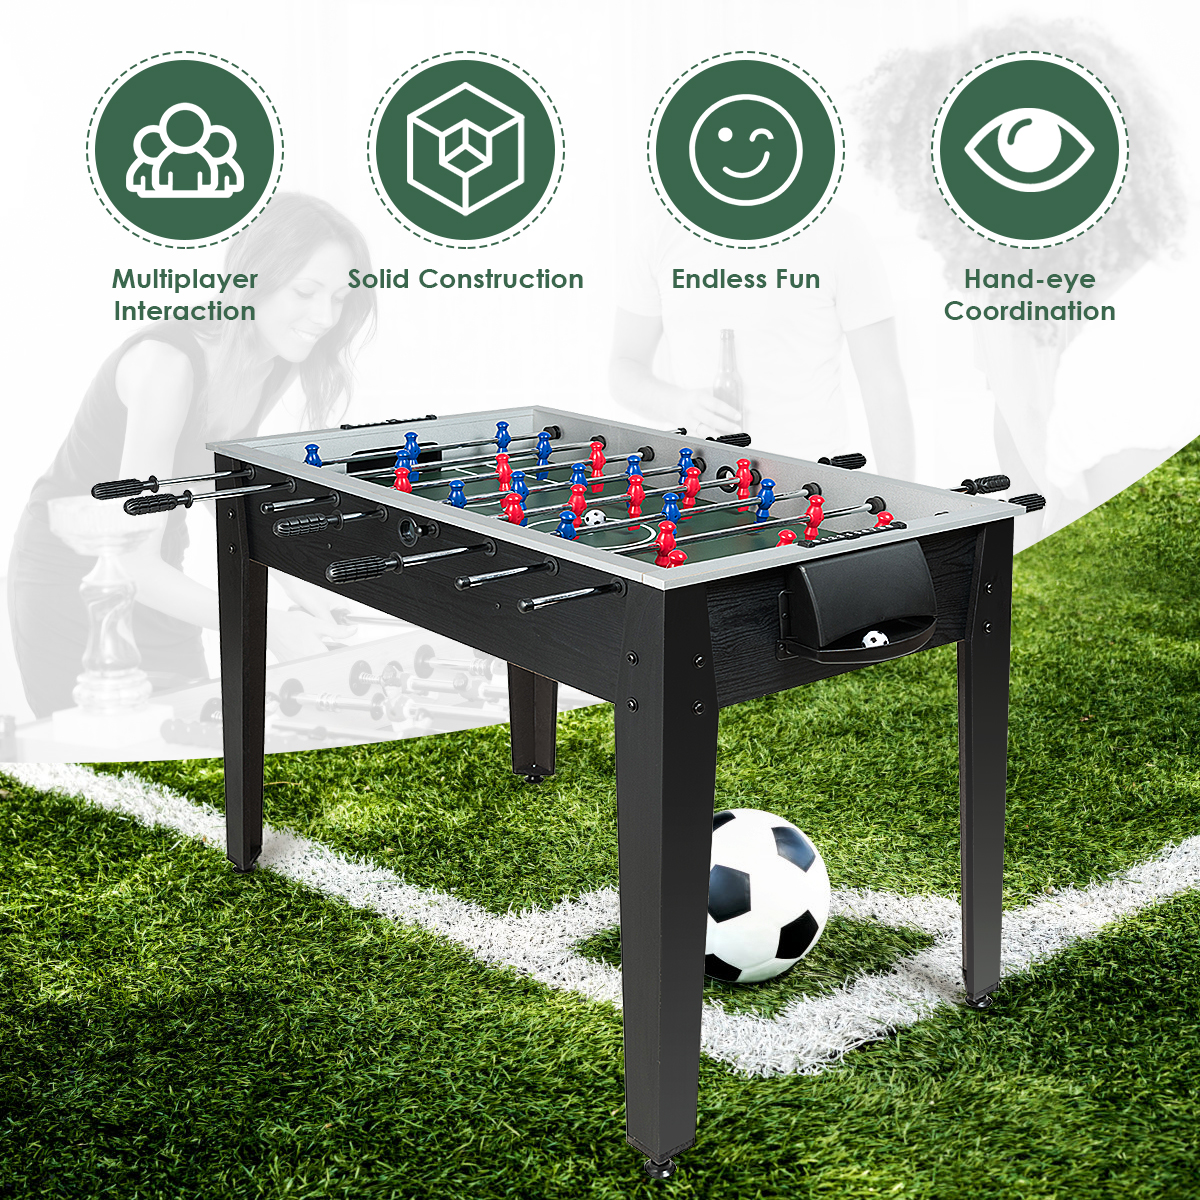 Costway 48'' Competition Sized Wooden Soccer Foosball Table Adults & Kids Home Recreation